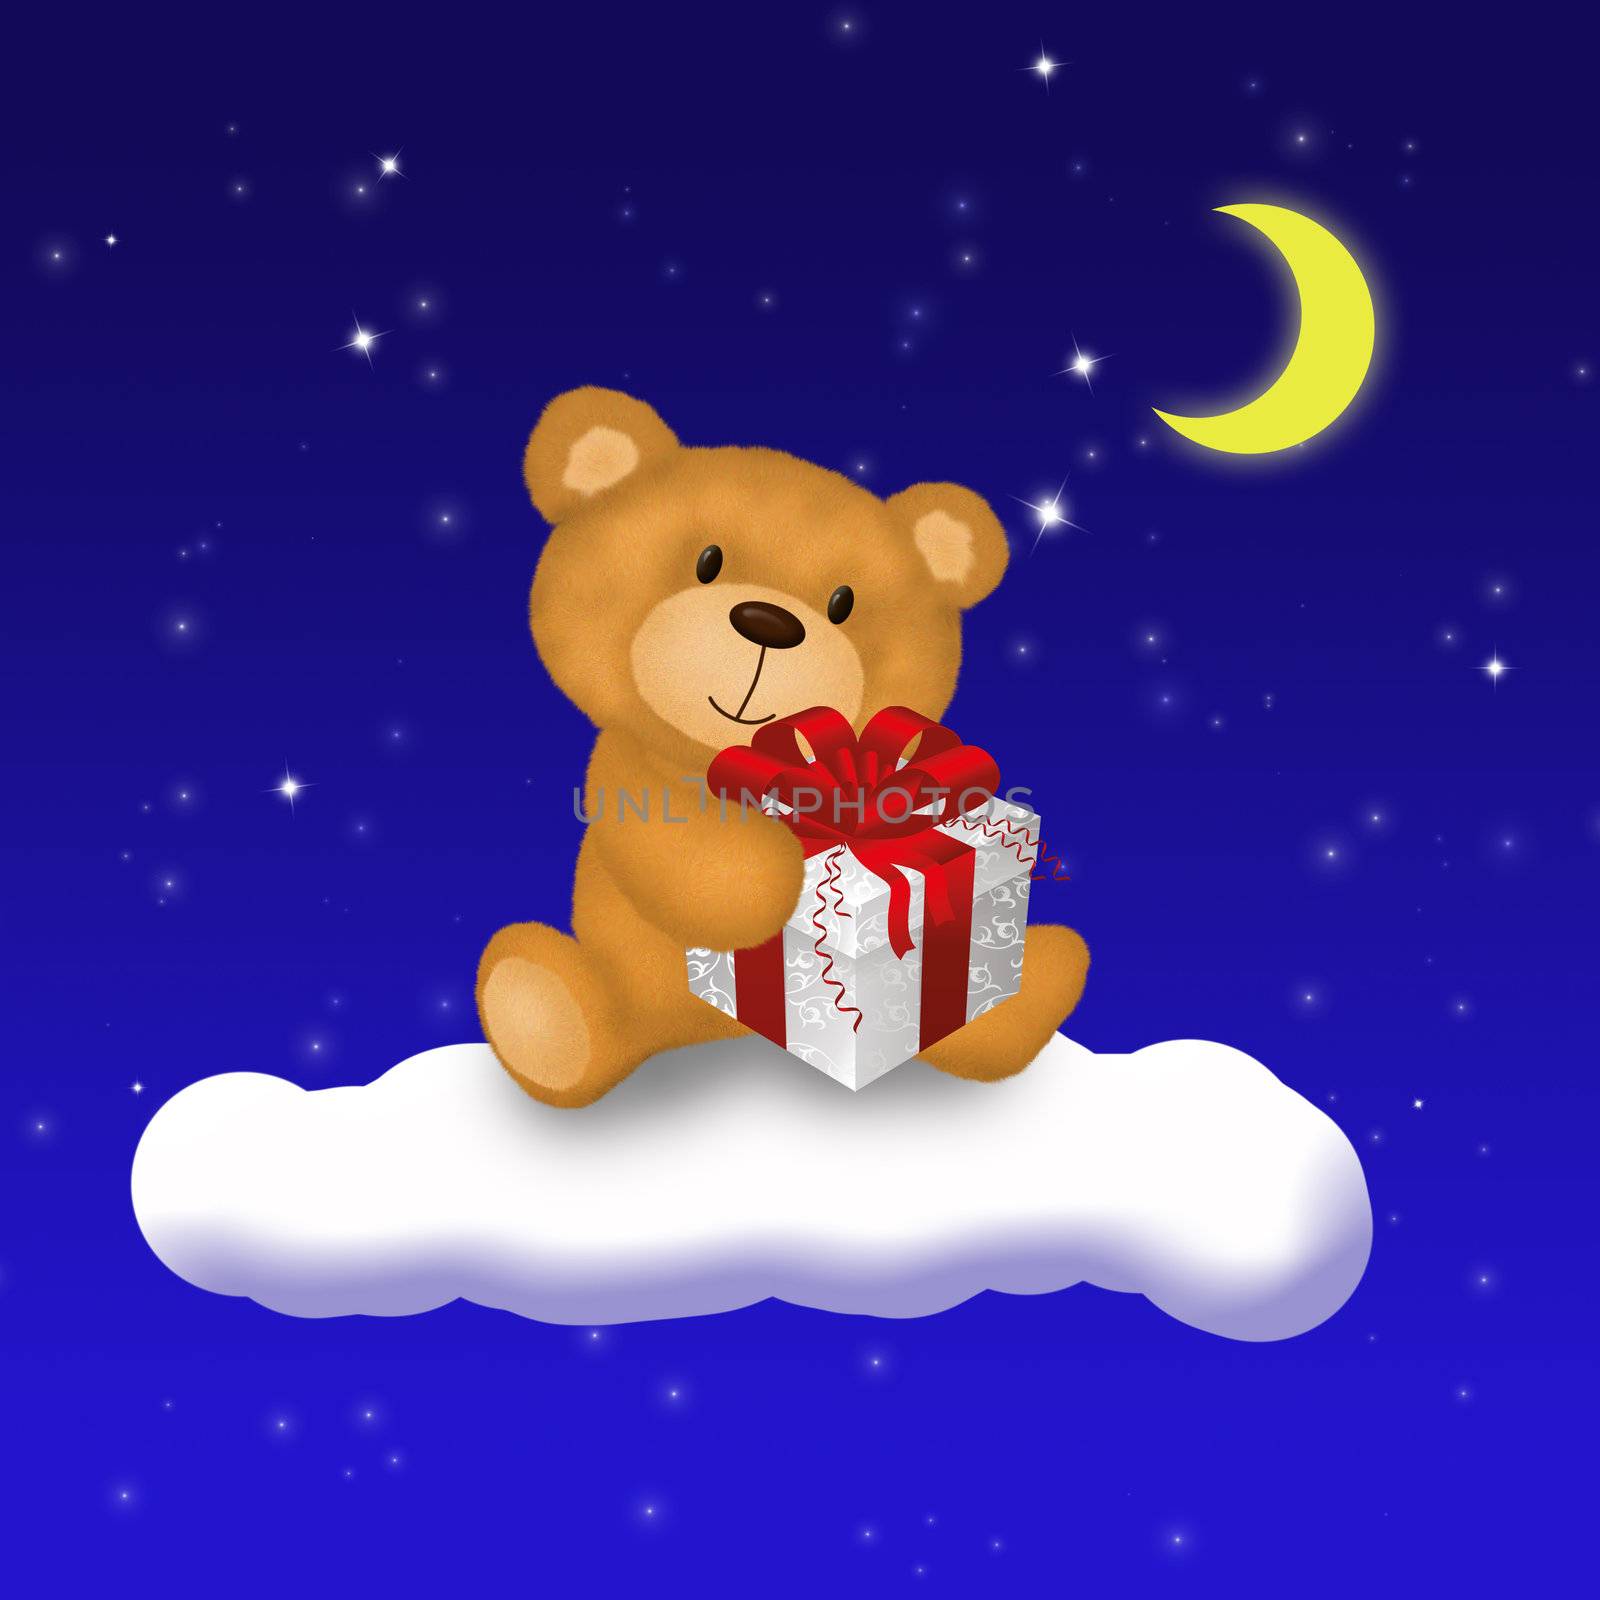 A cute Teddy Bear holding a gift box and sitting on a cloud in front of a blue night sky with brigh stars and moon.